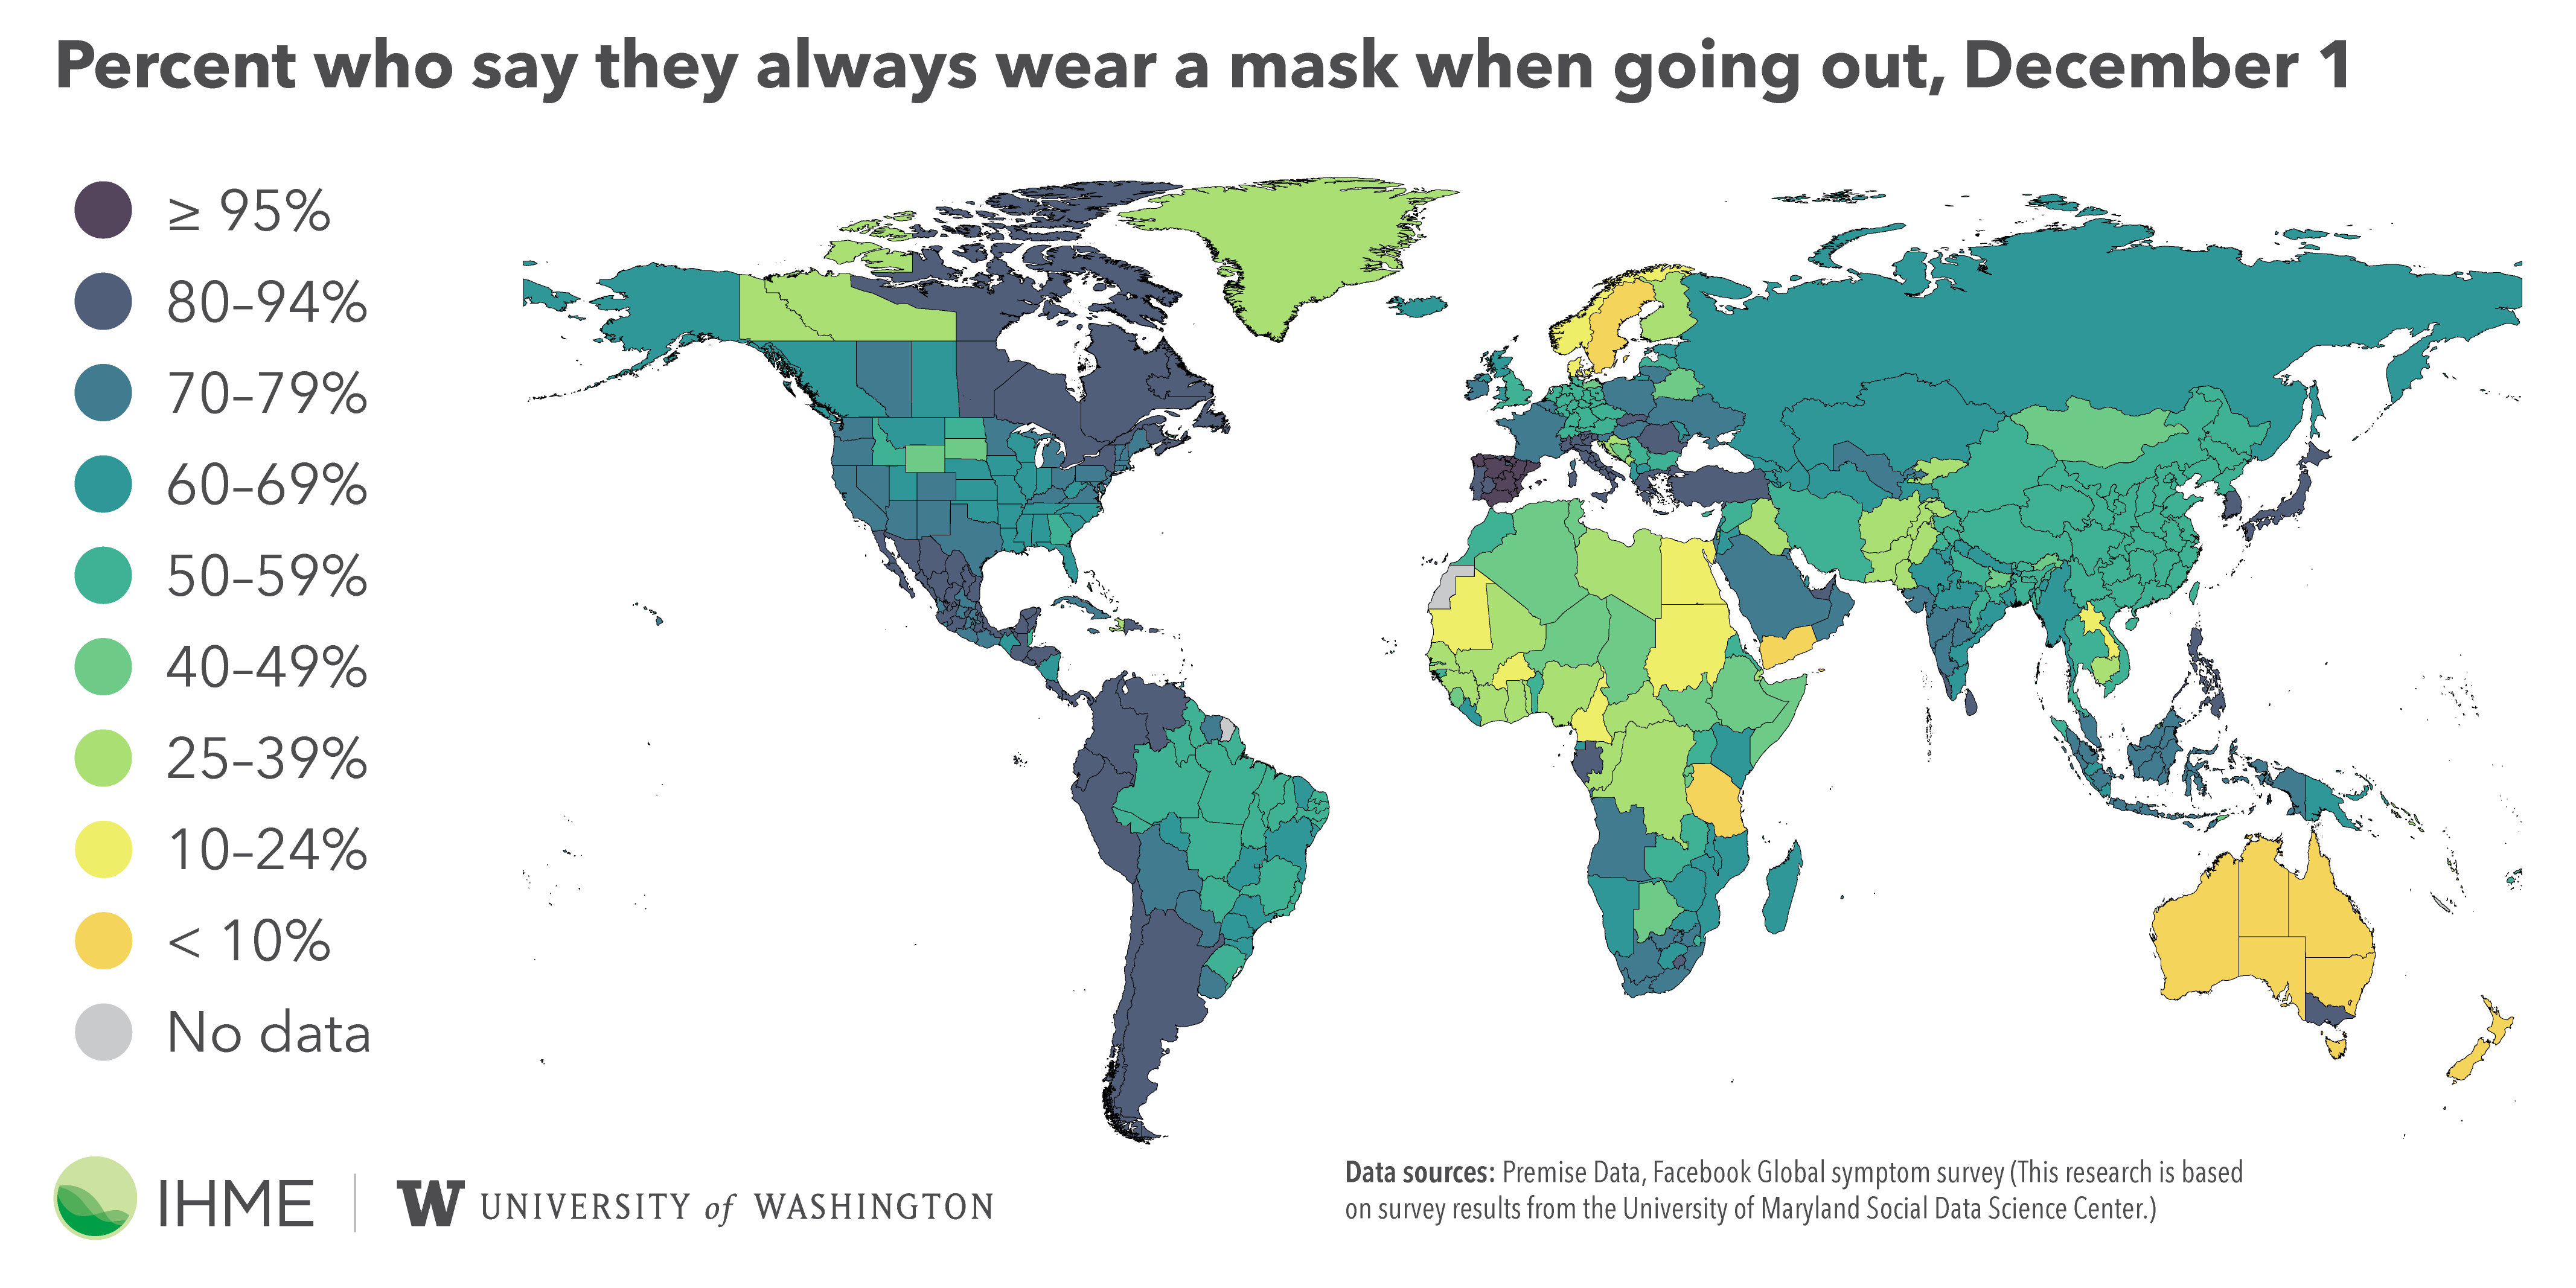 World map showing percent of people in each country who say they always wear a mask when going out